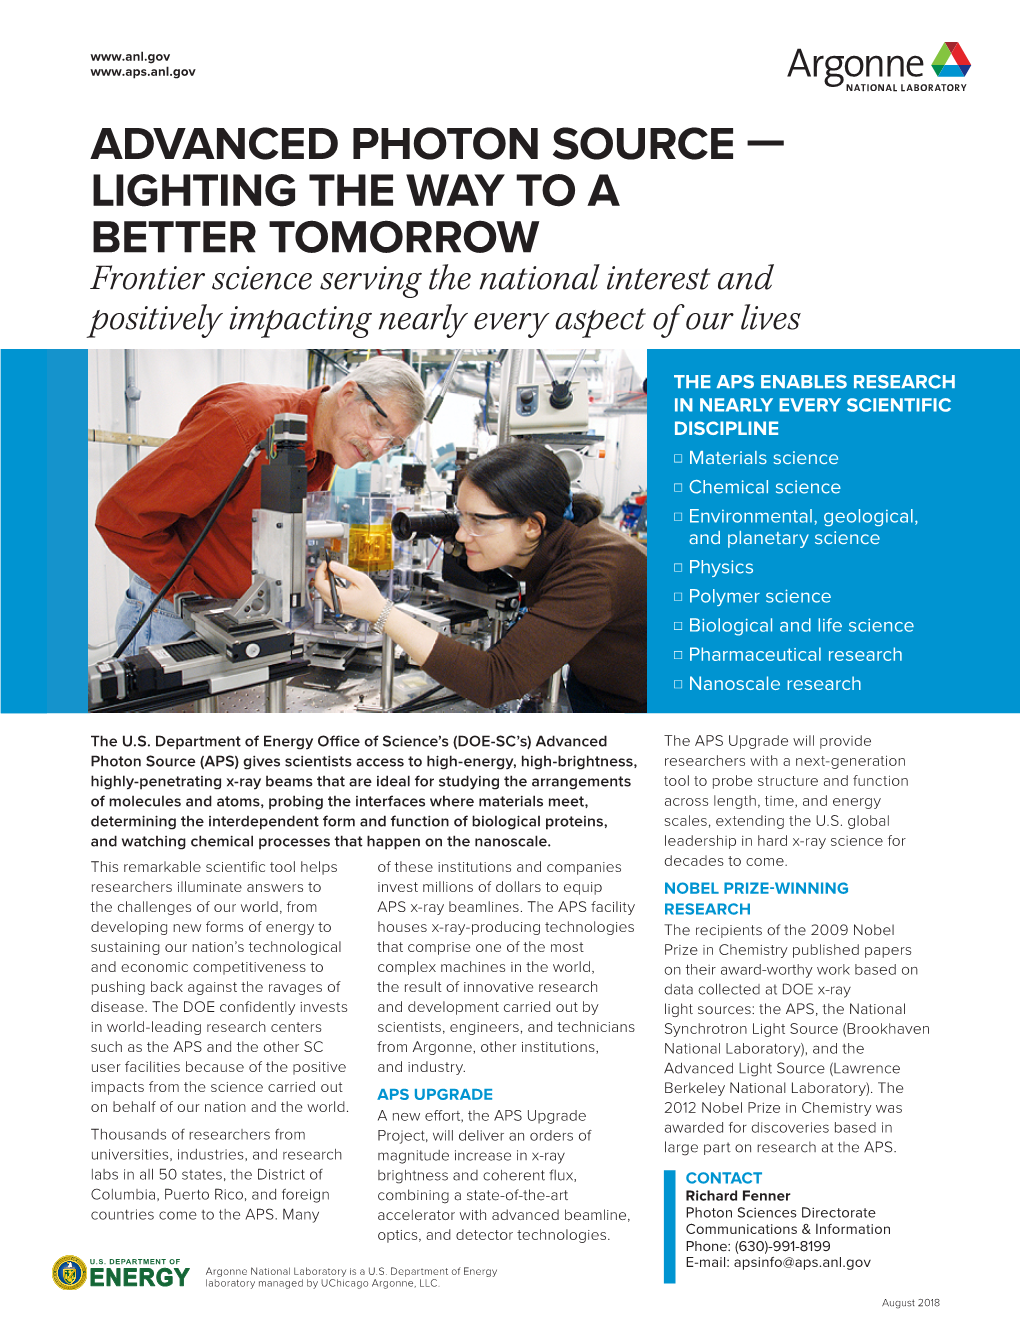 Advanced Photon Source: Lighting the Way to a Better Tomorrow